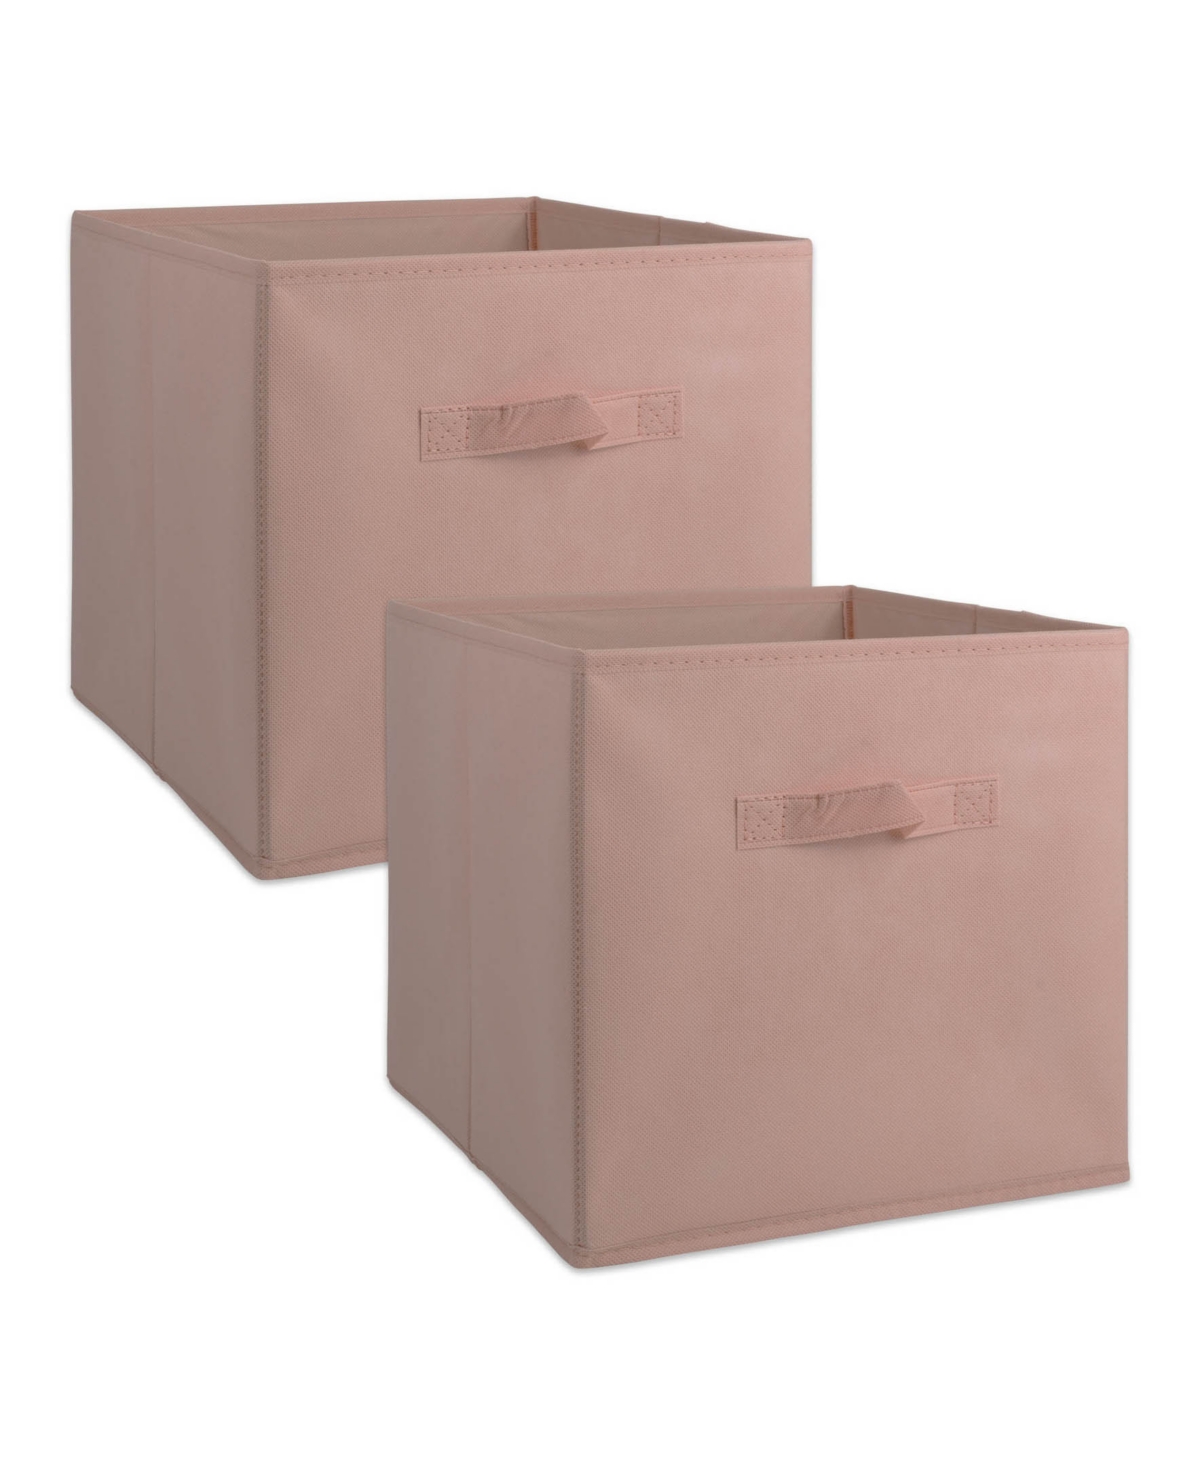 Non-woven Polypropylene Cube Solid Millennial Square Set of 2 - Pink